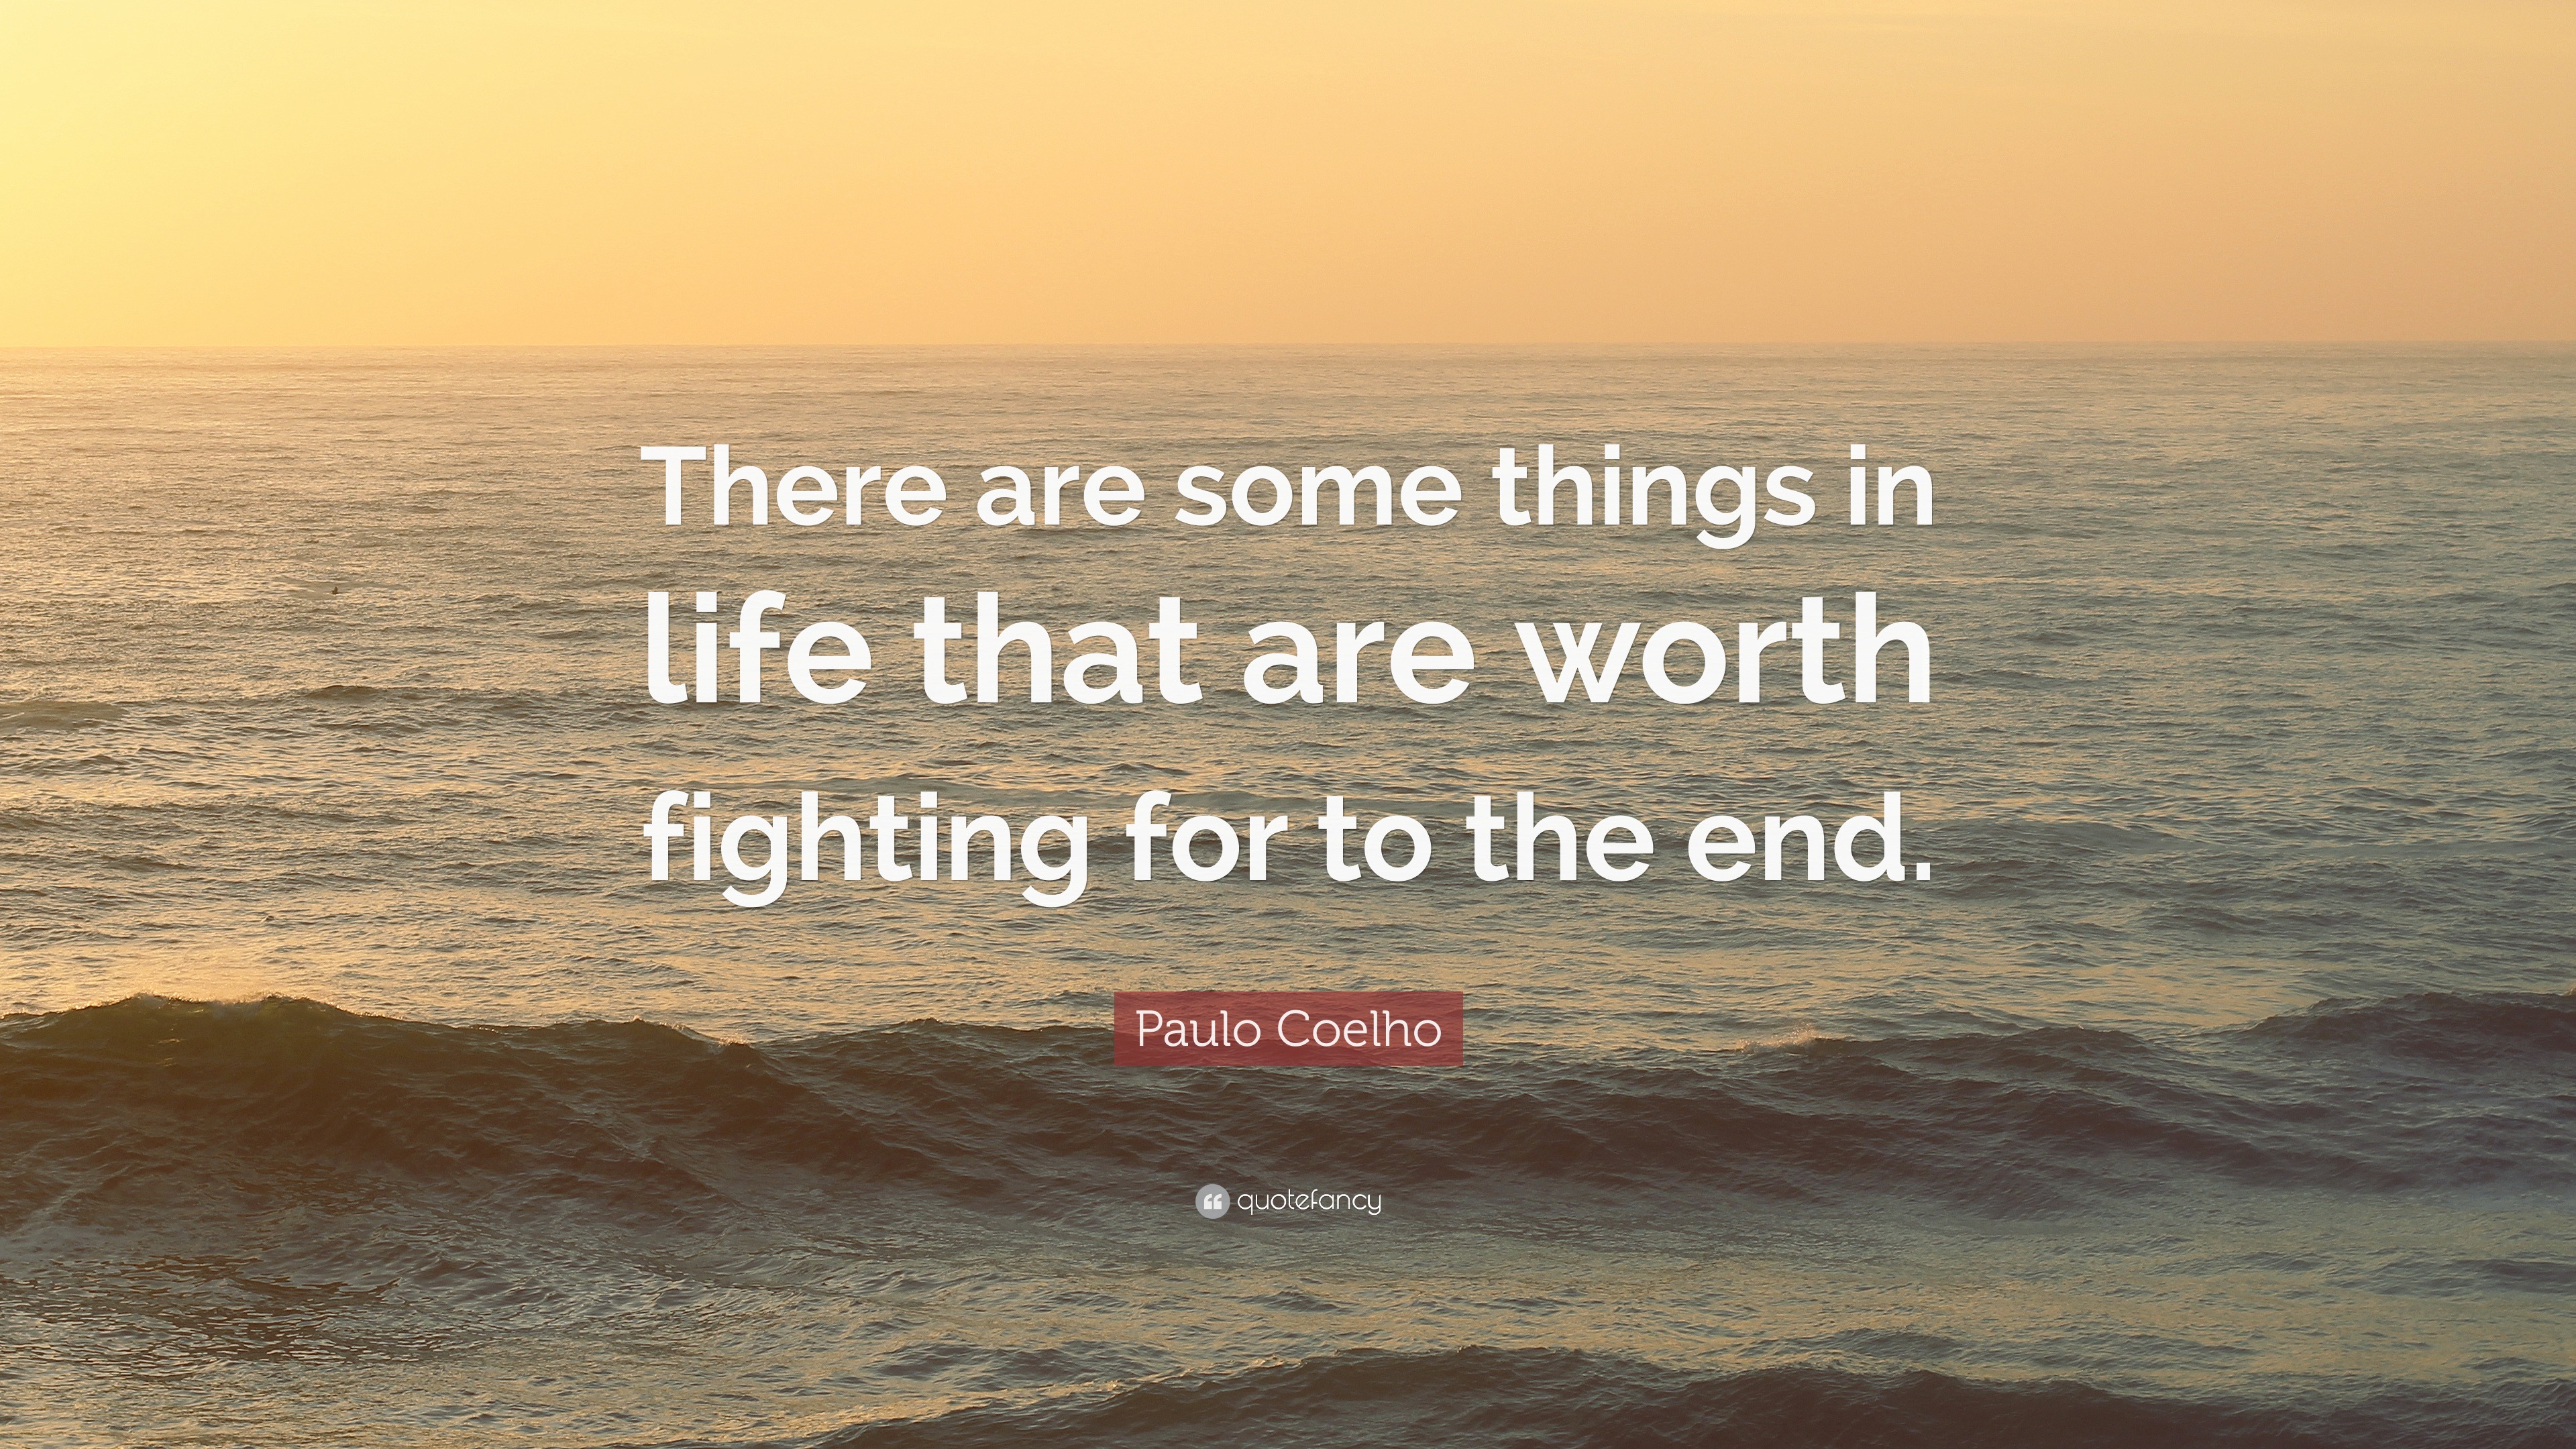 Paulo Coelho Quote: “There are some things in life that are worth